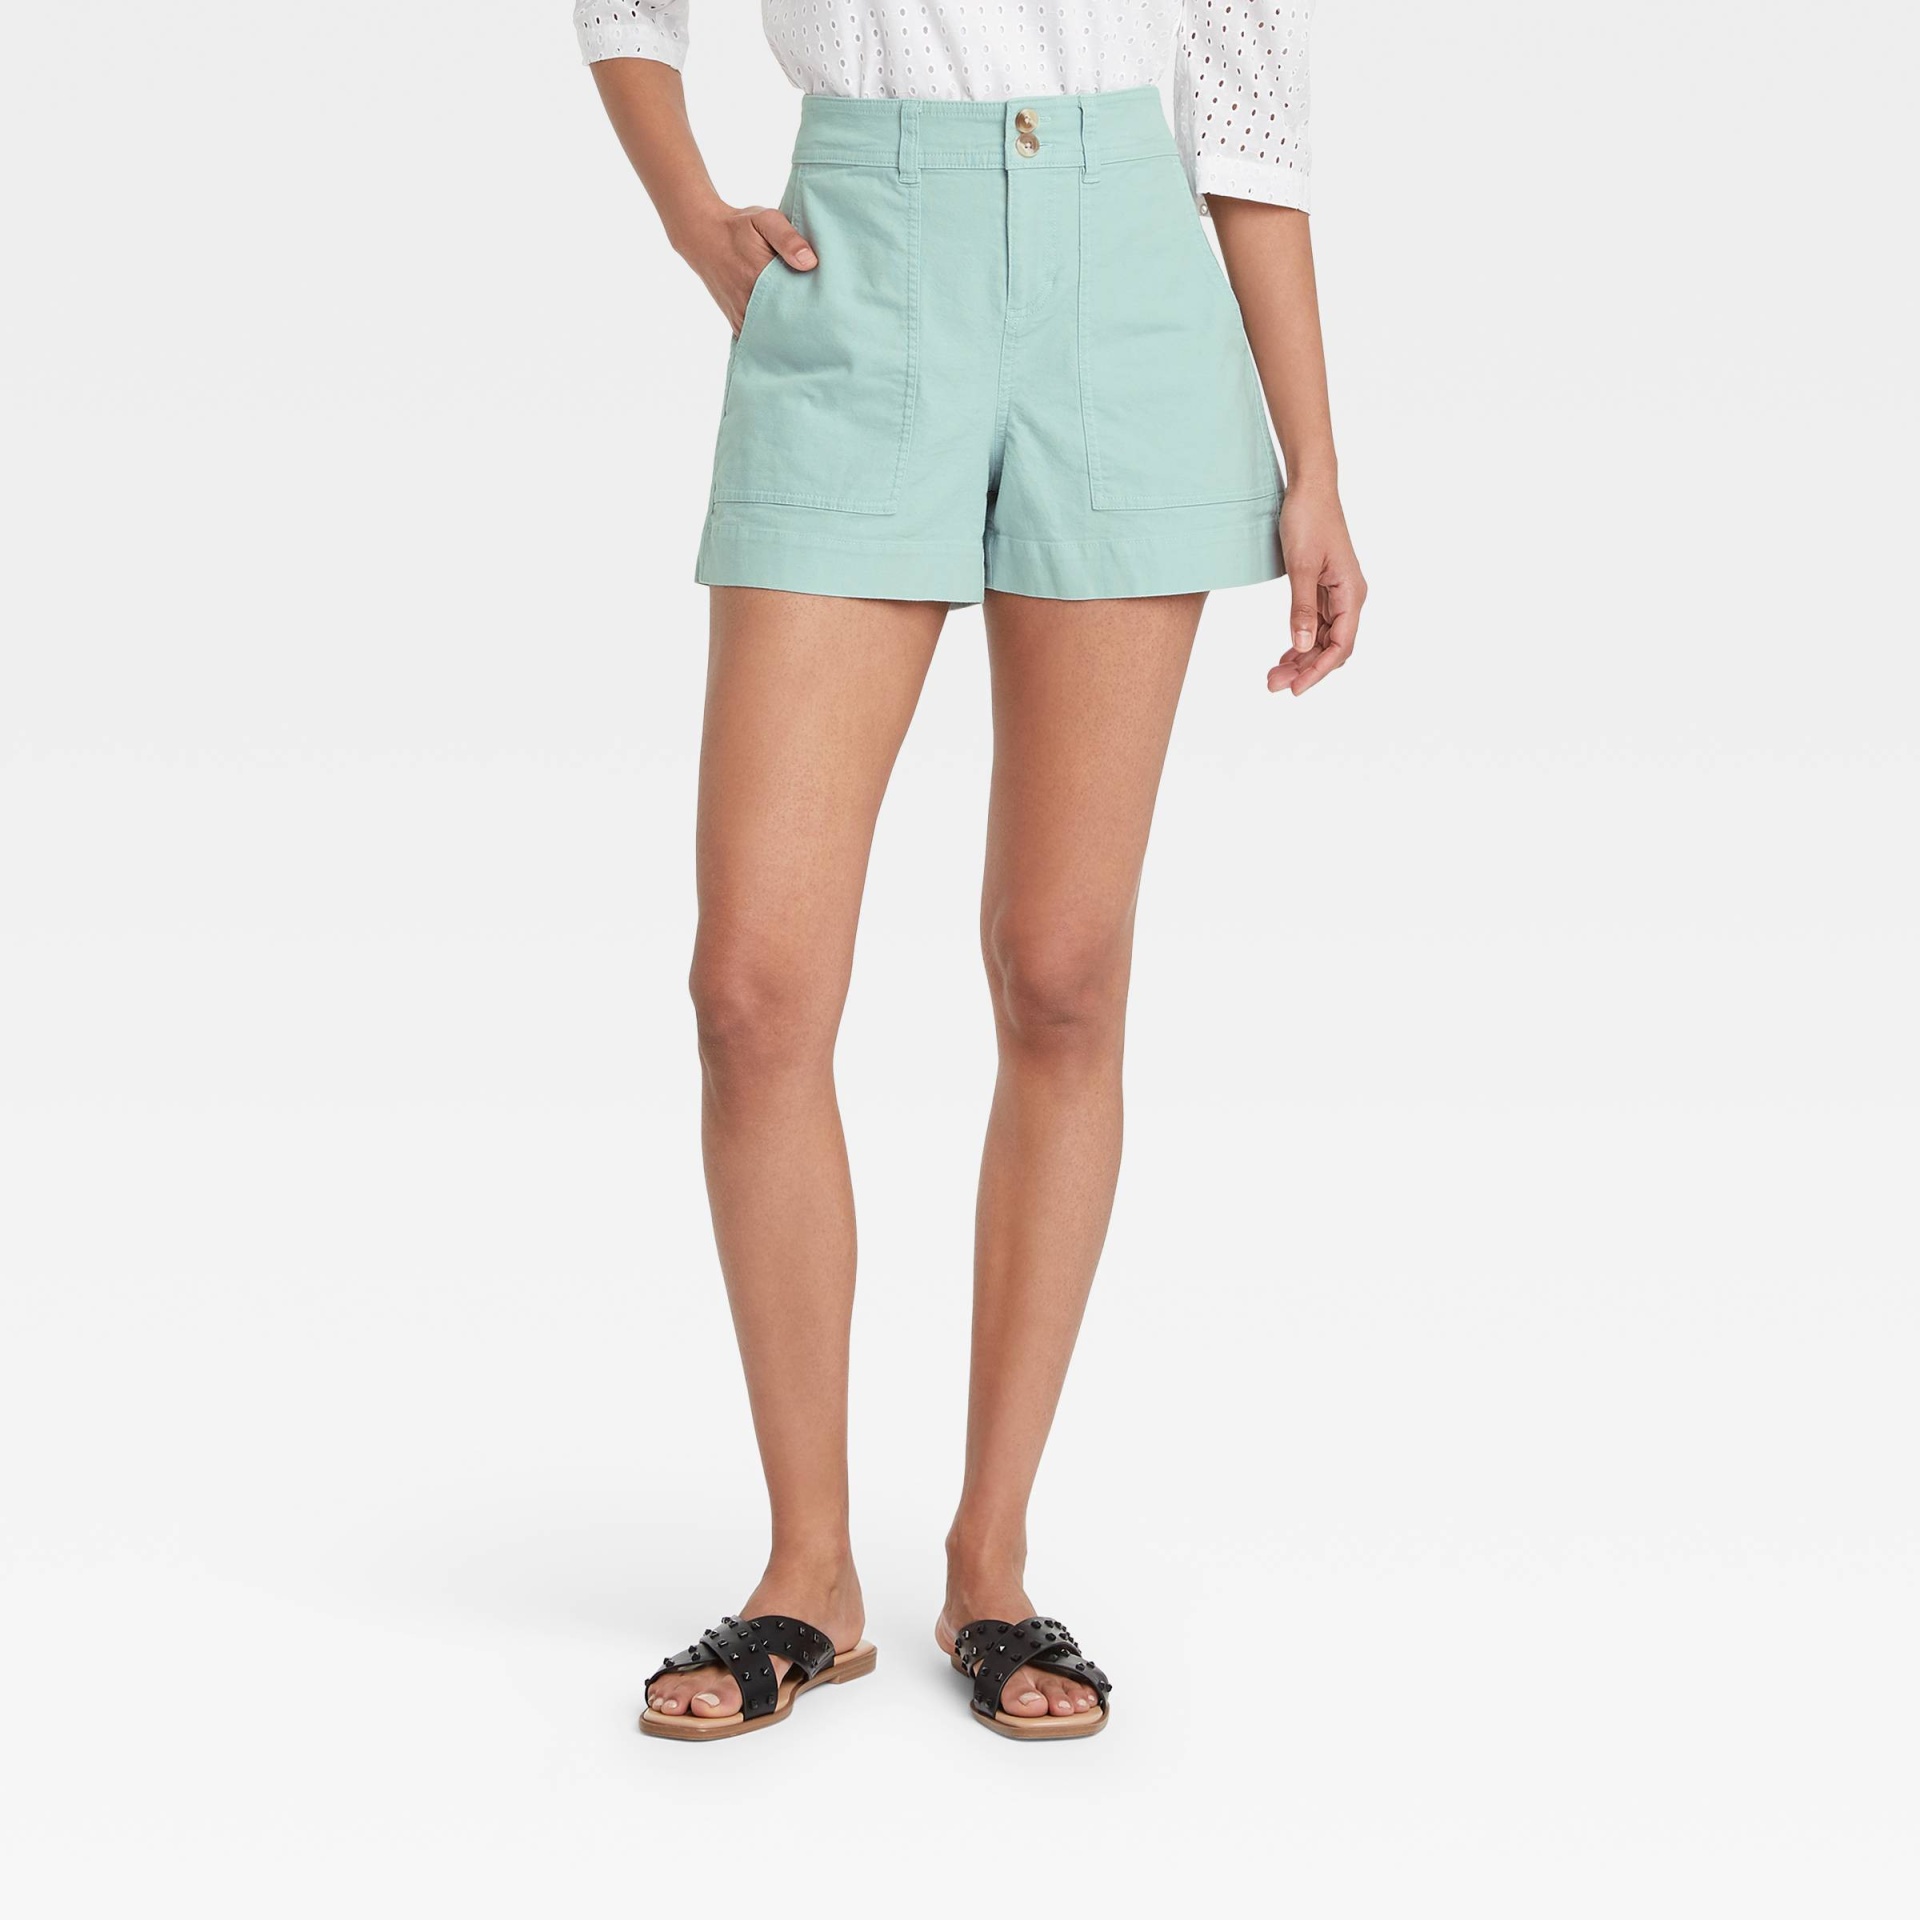 slide 1 of 3, Women's High-Rise Shorts - A New Day Mint 12, 1 ct